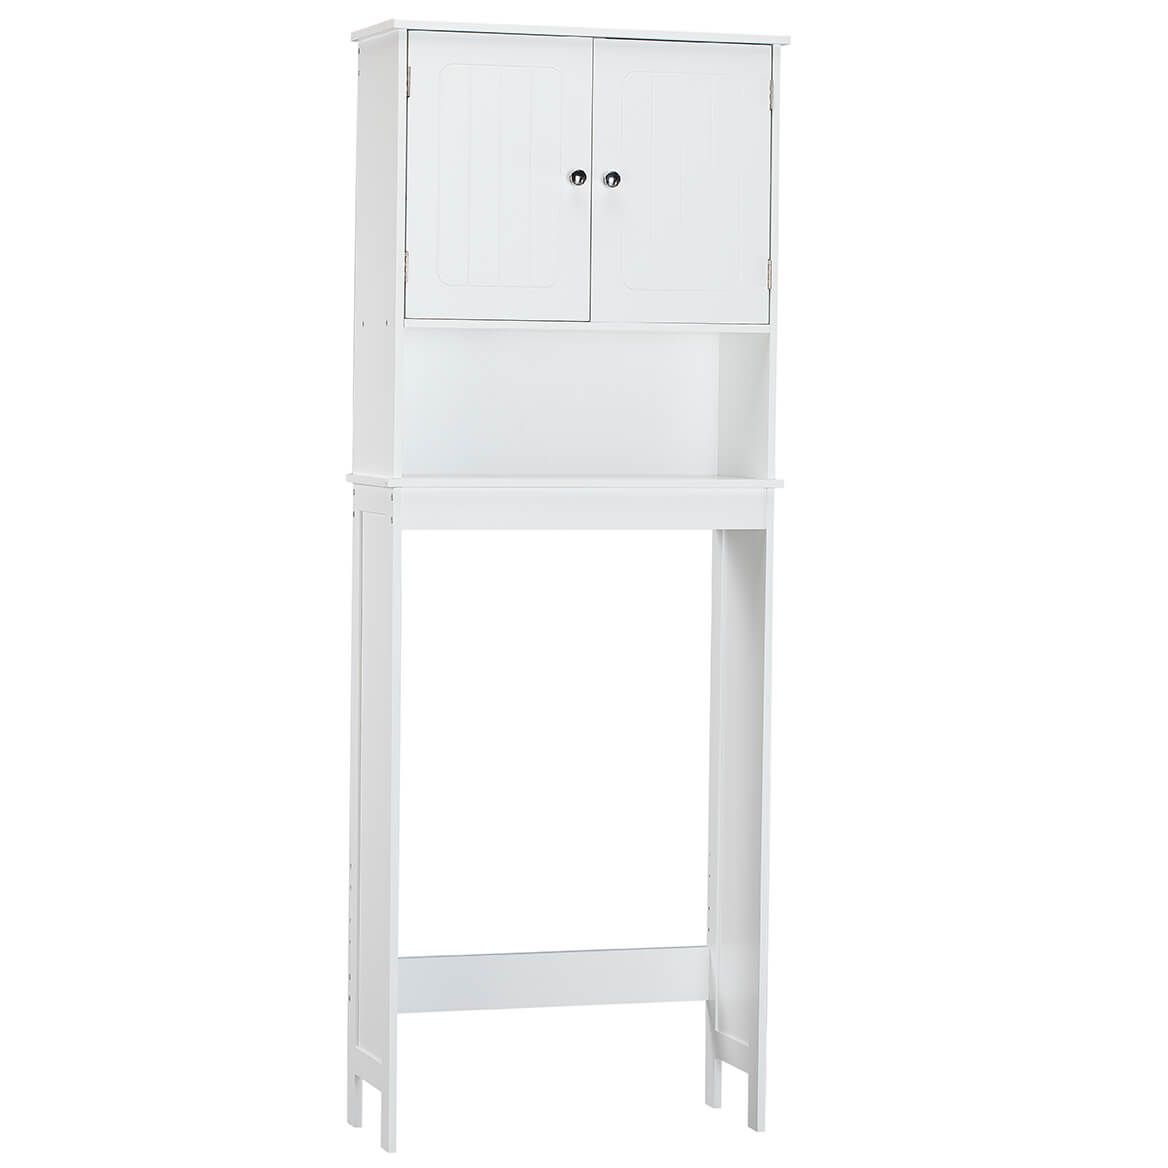 Ambrose Collection Space Saver Cabinet by OakRidge™  XL + '-' + 367154